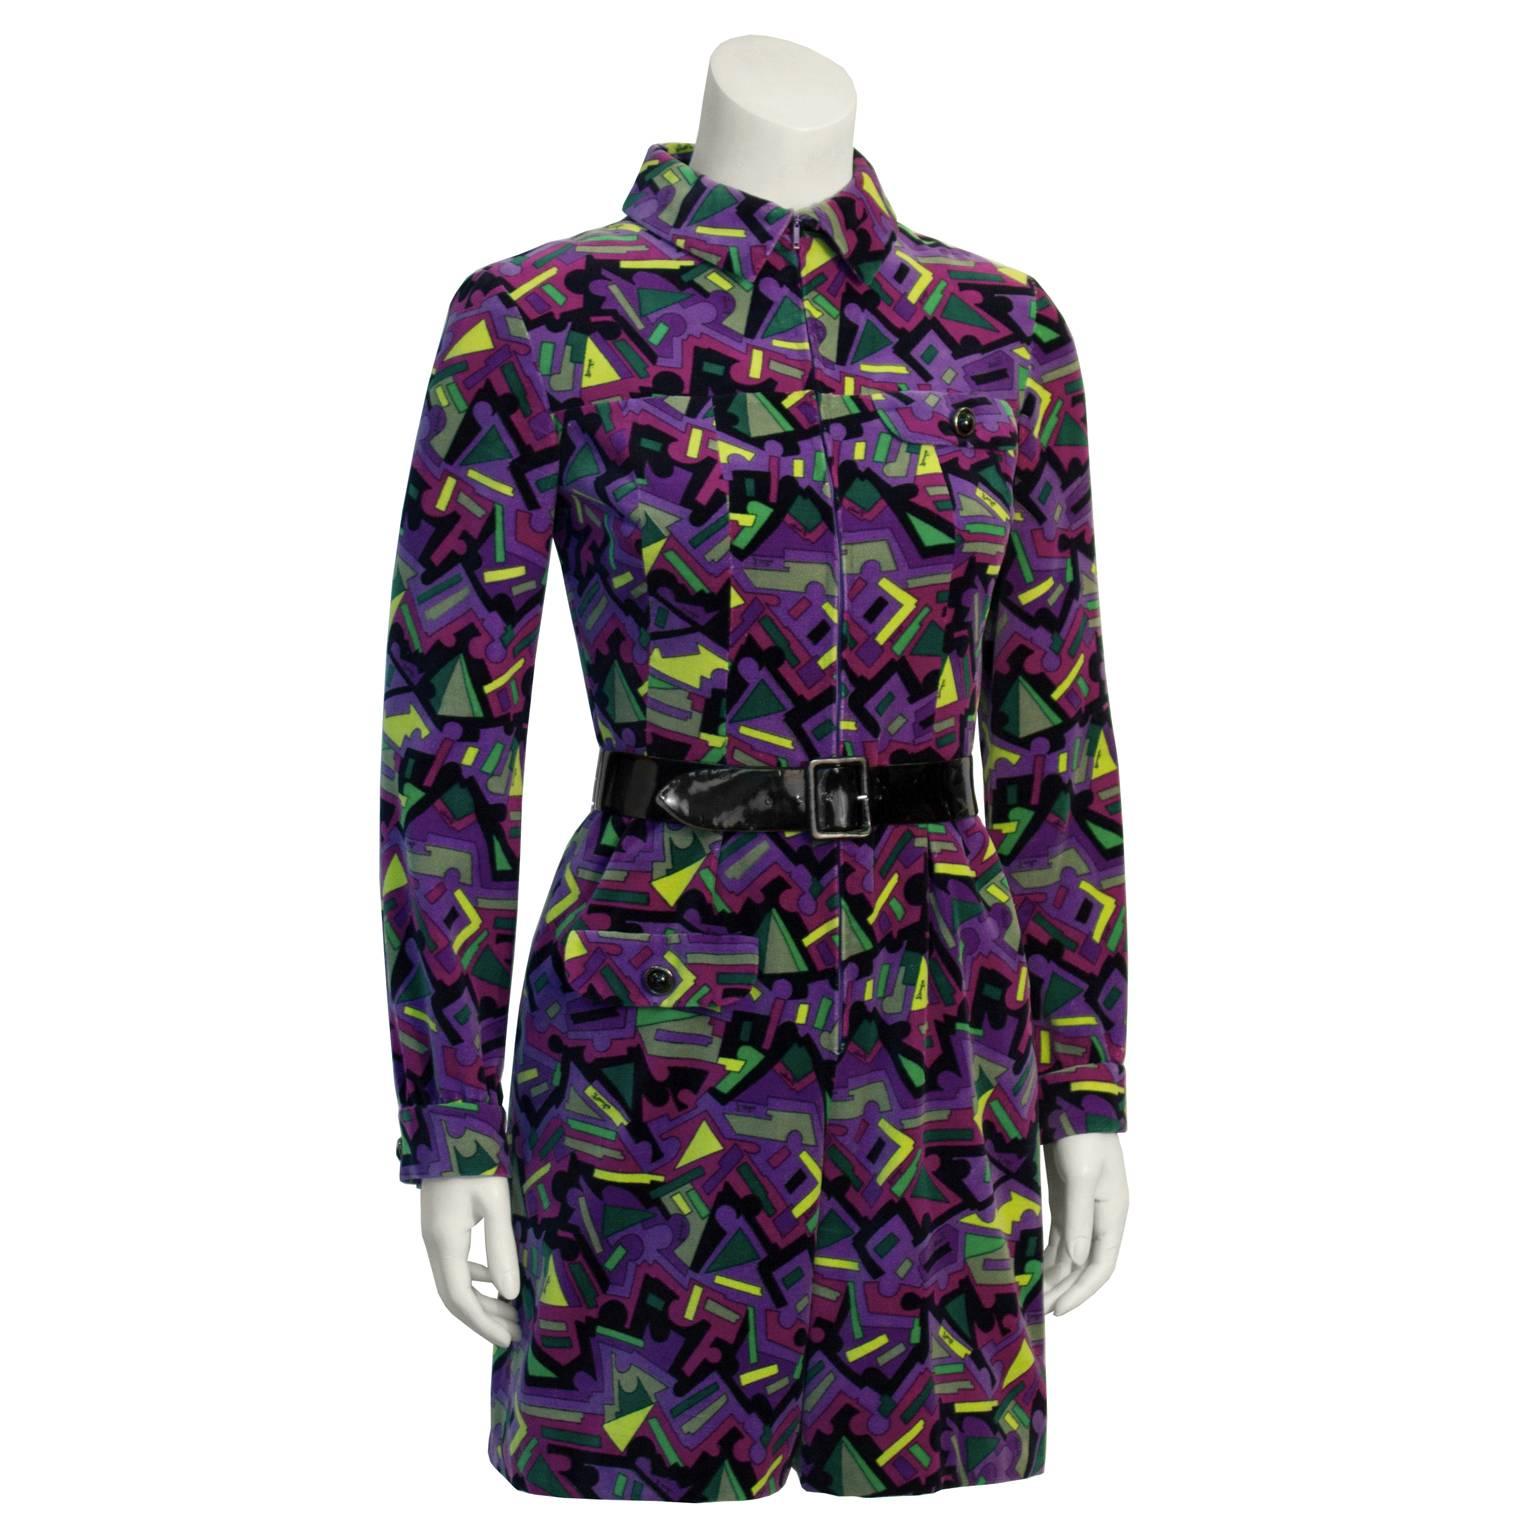 This adorable late 1960's Pucci purple velvet romper is an absolute must have collectors piece with it's signature multi-color abstract pattern throughout. The print is purple with notes of brown, green, yellow and black. Long sleeved, with a collar